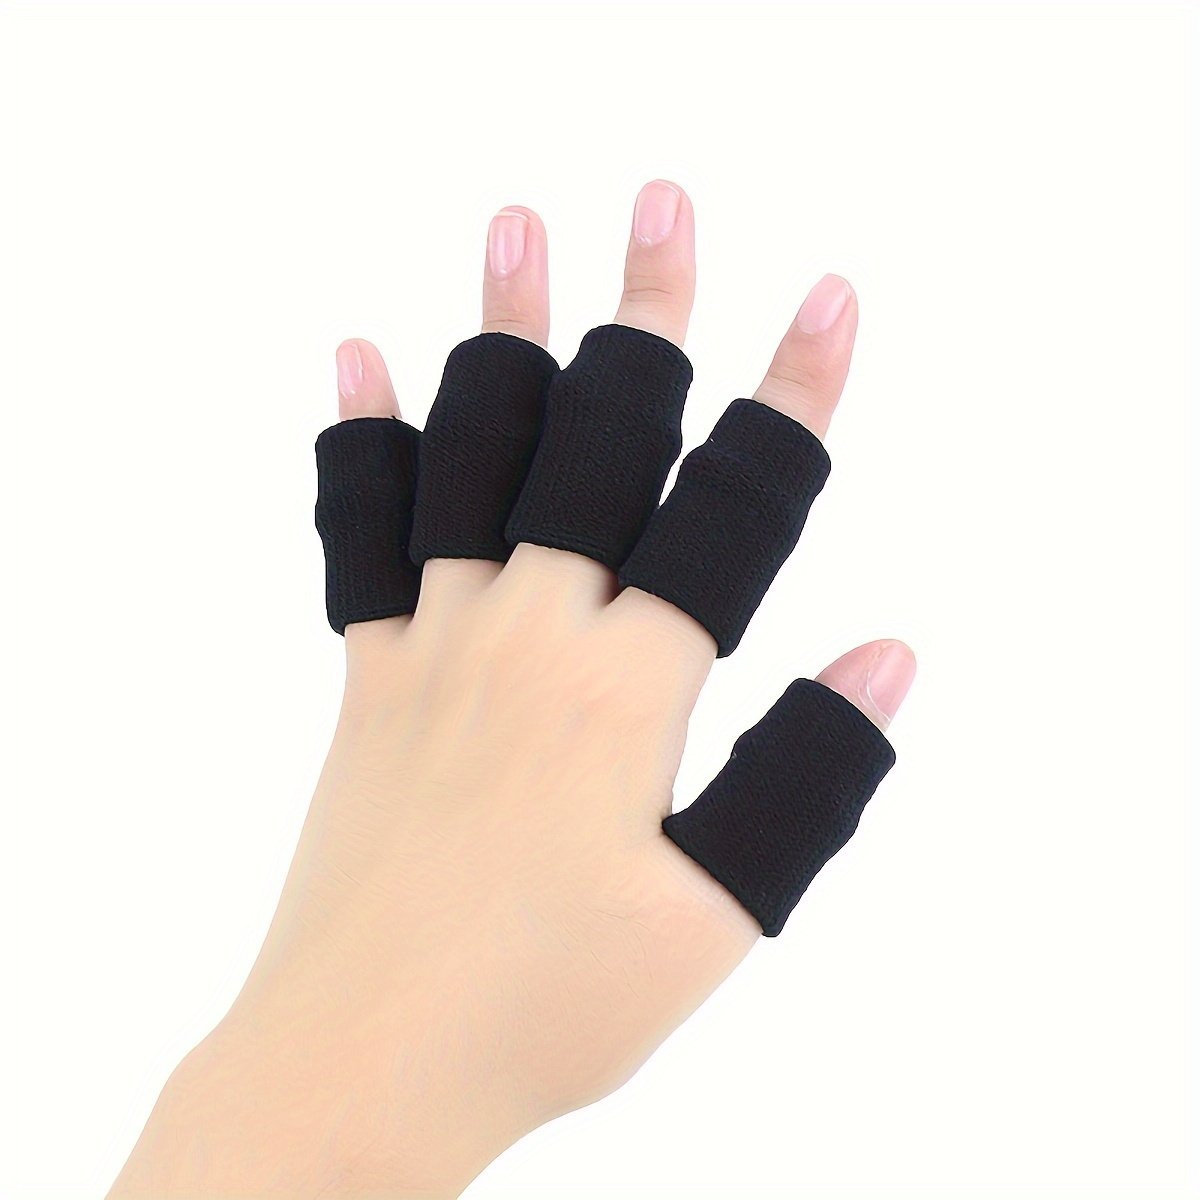 Finger Cots Cut Resistant Protector - Finger Covers For Cuts, Gloves Life  Extender, Cut Resistant Finger Protectors For Kitchen, Work, Sculpture,  Anti